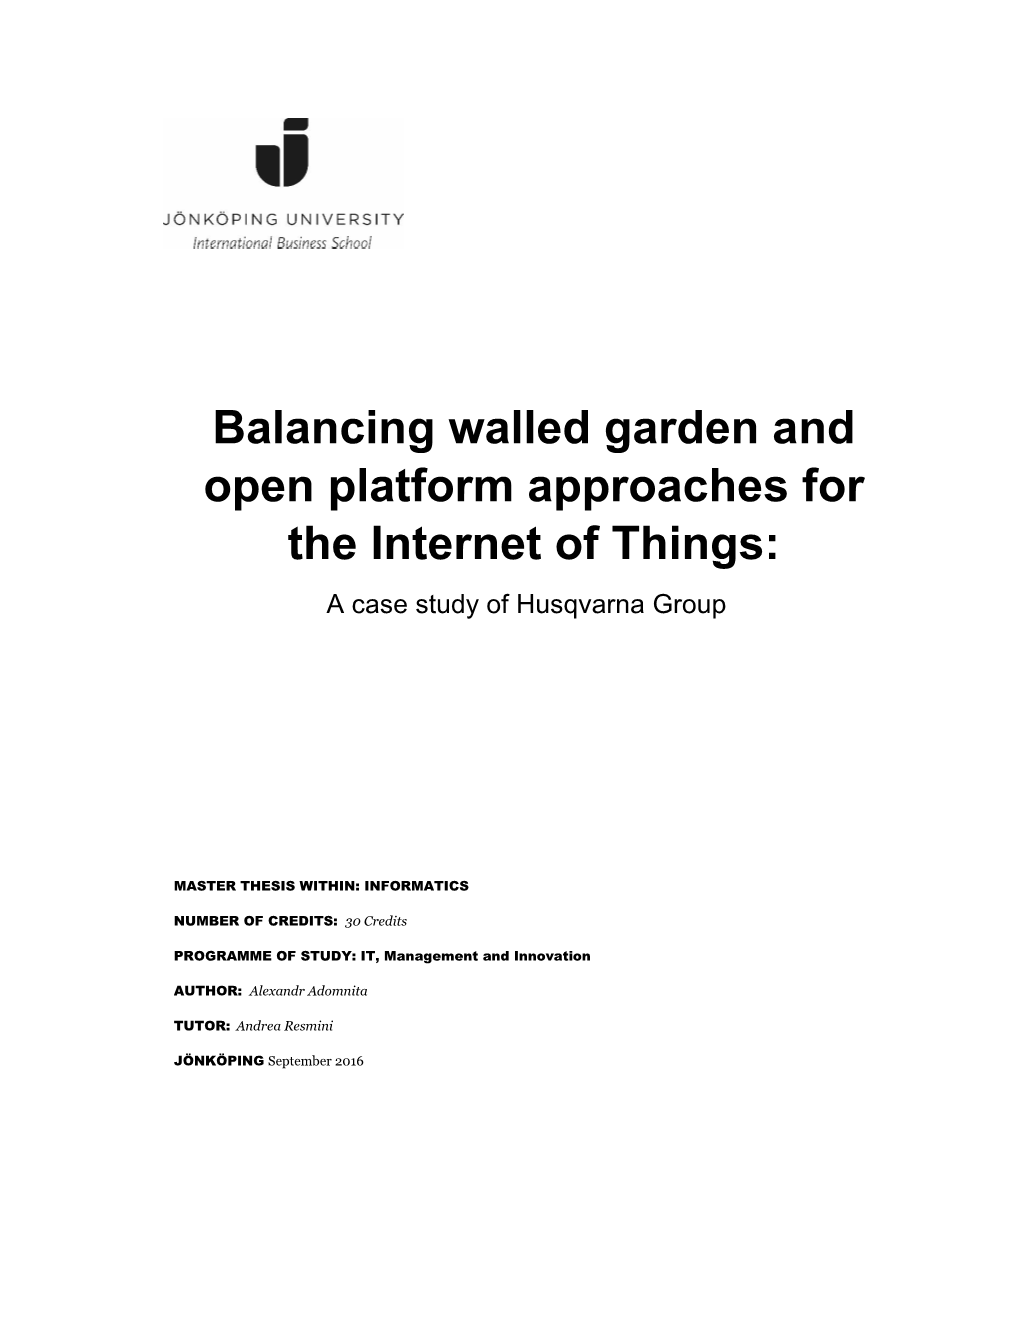 Balancing Walled Garden and Open Platform Approaches for the Internet of Things: a Case Study of Husqvarna Group